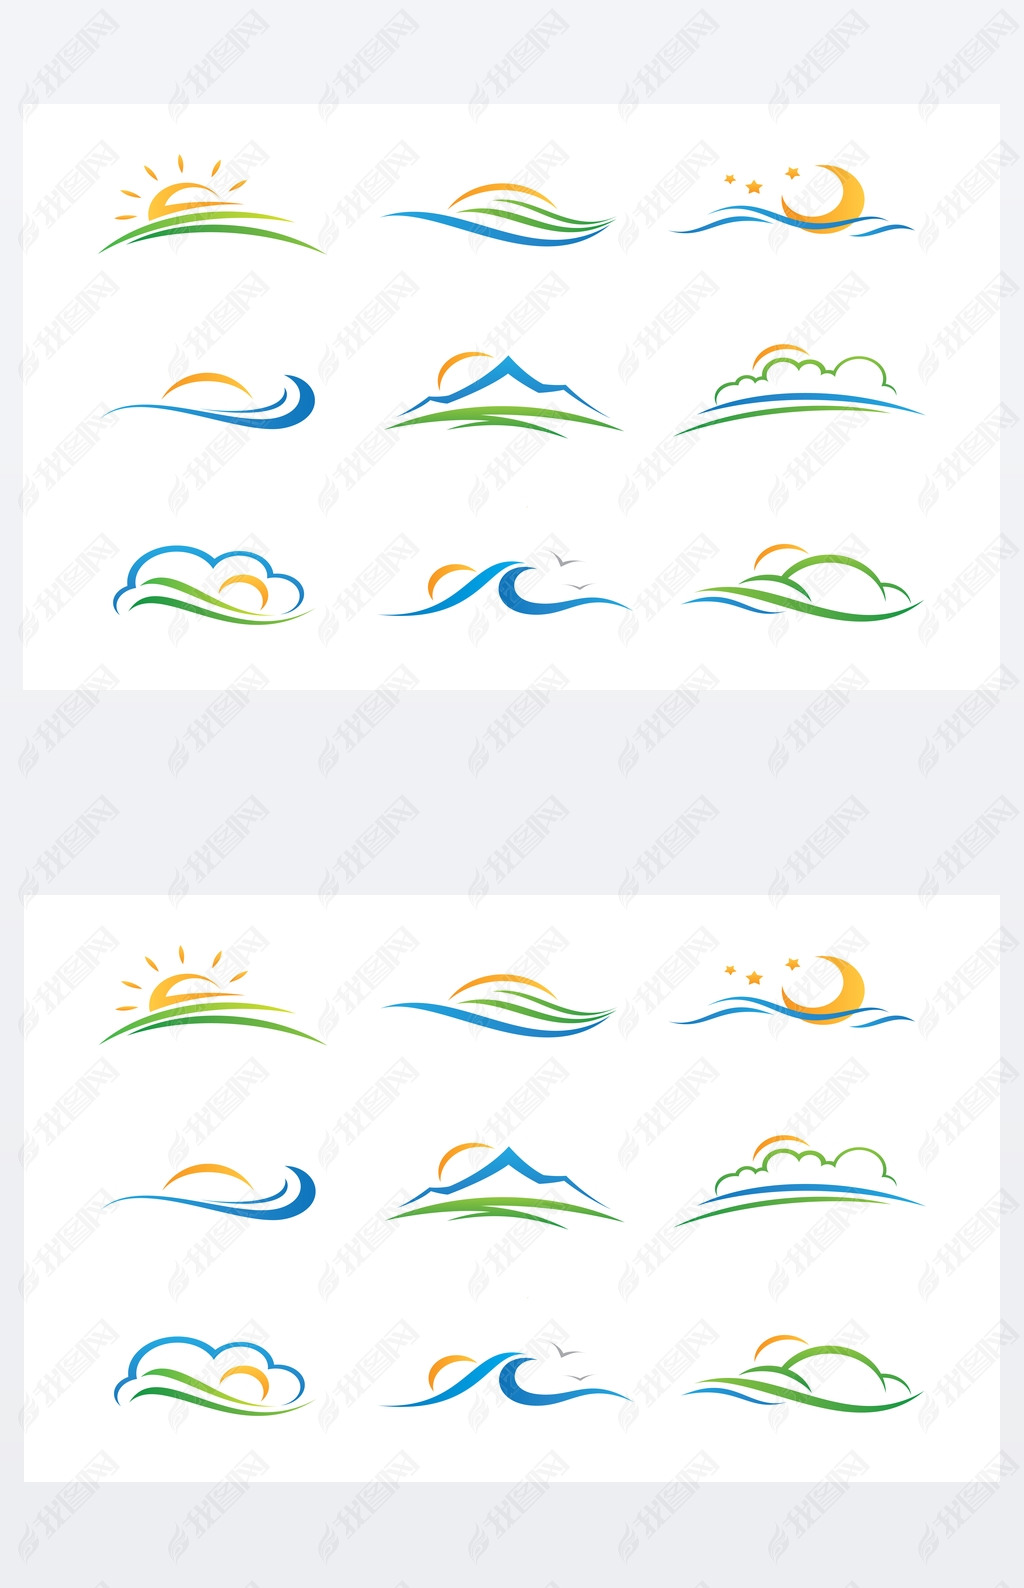 Landscape nature experience and vacation trel agency illustration logotype